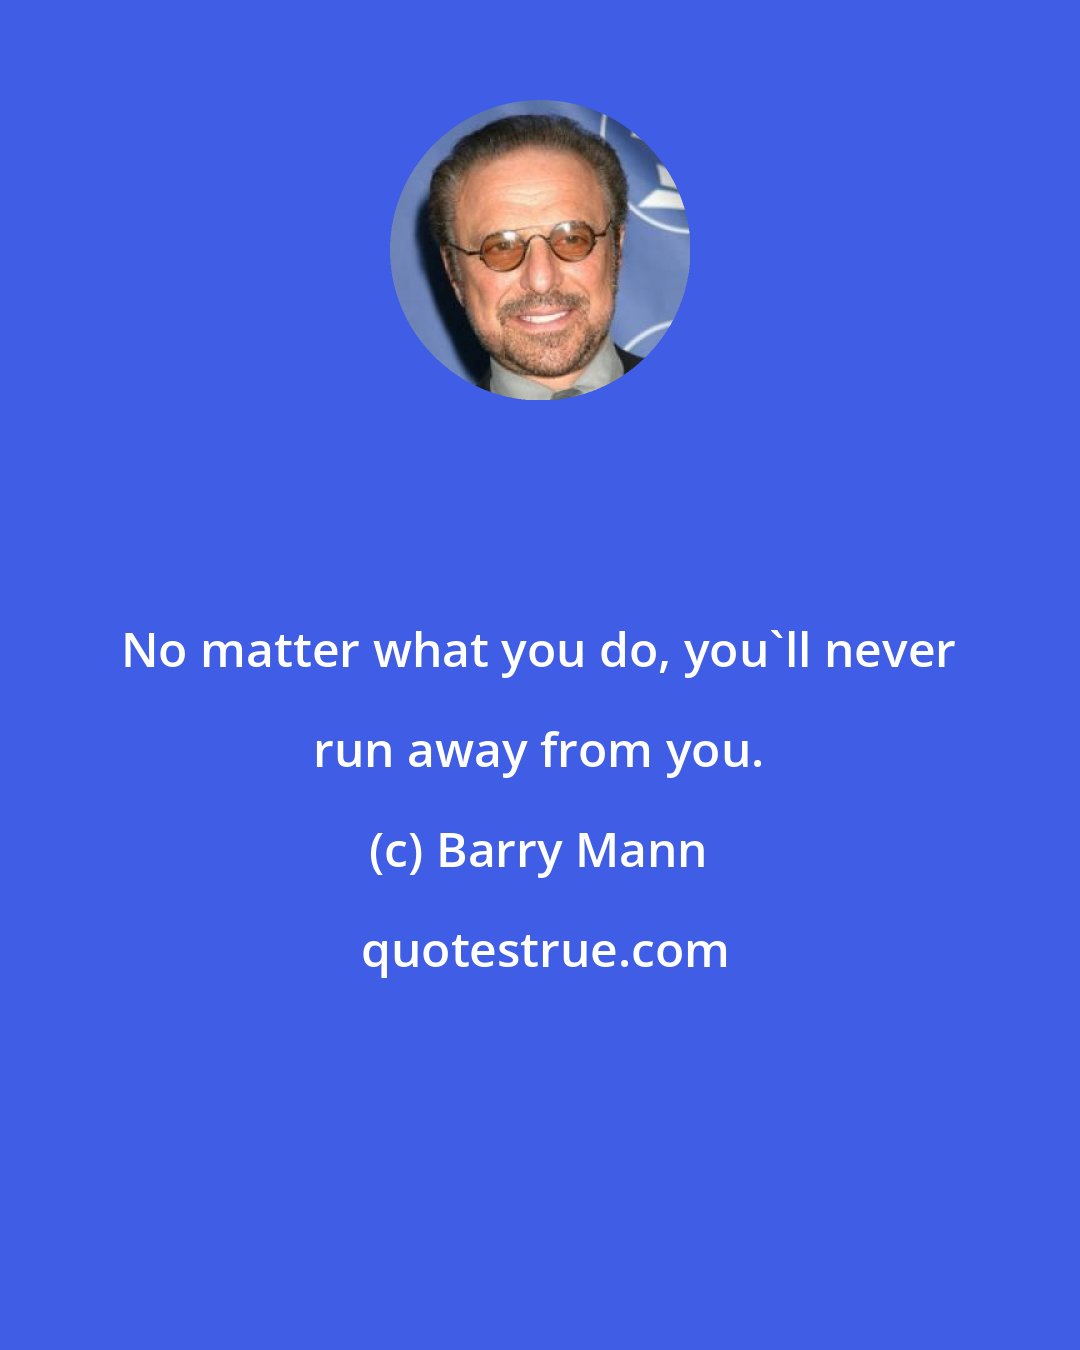 Barry Mann: No matter what you do, you'll never run away from you.